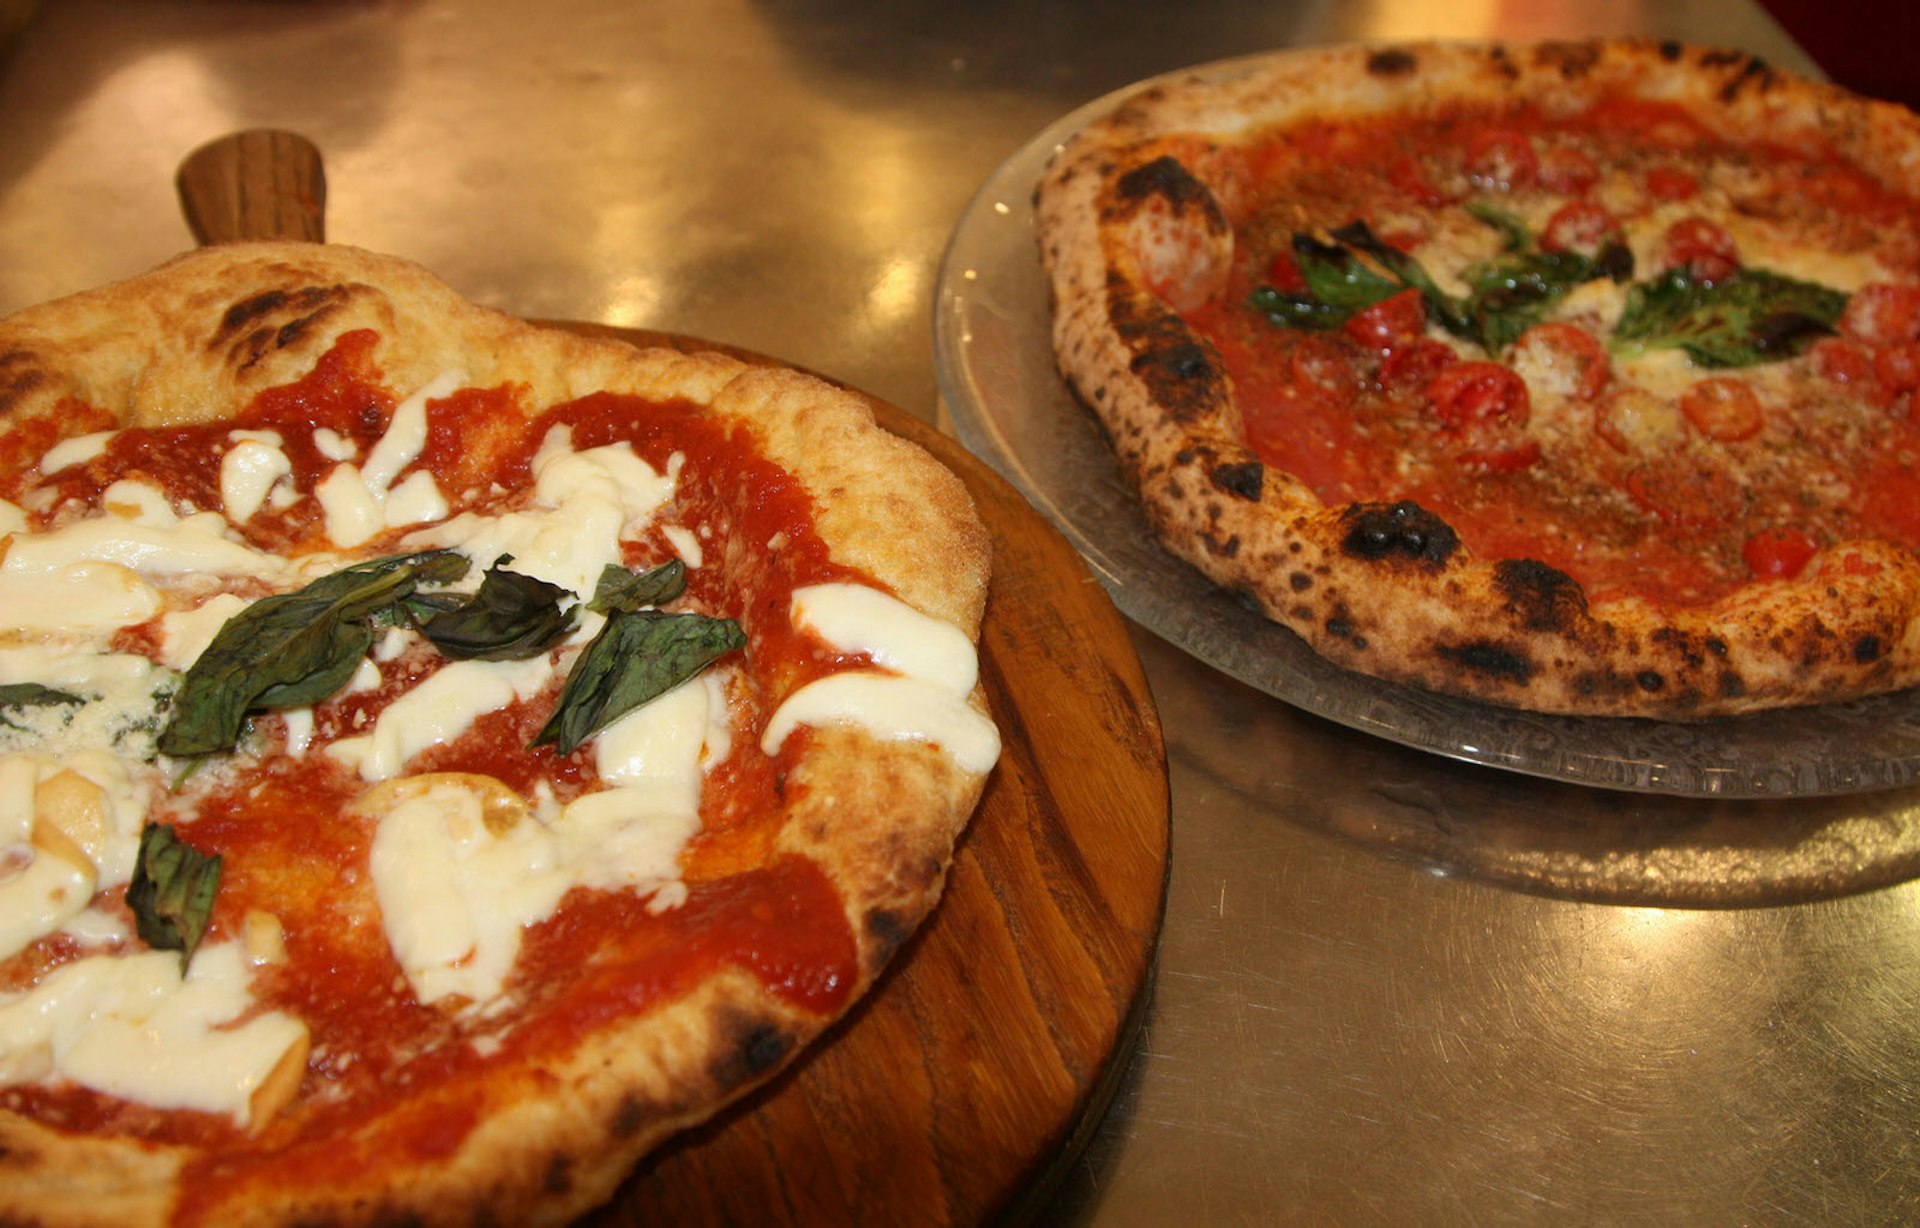 Margherita and Marinara pizza, side by side at Starita © Kristin Melia / Lonely Planet